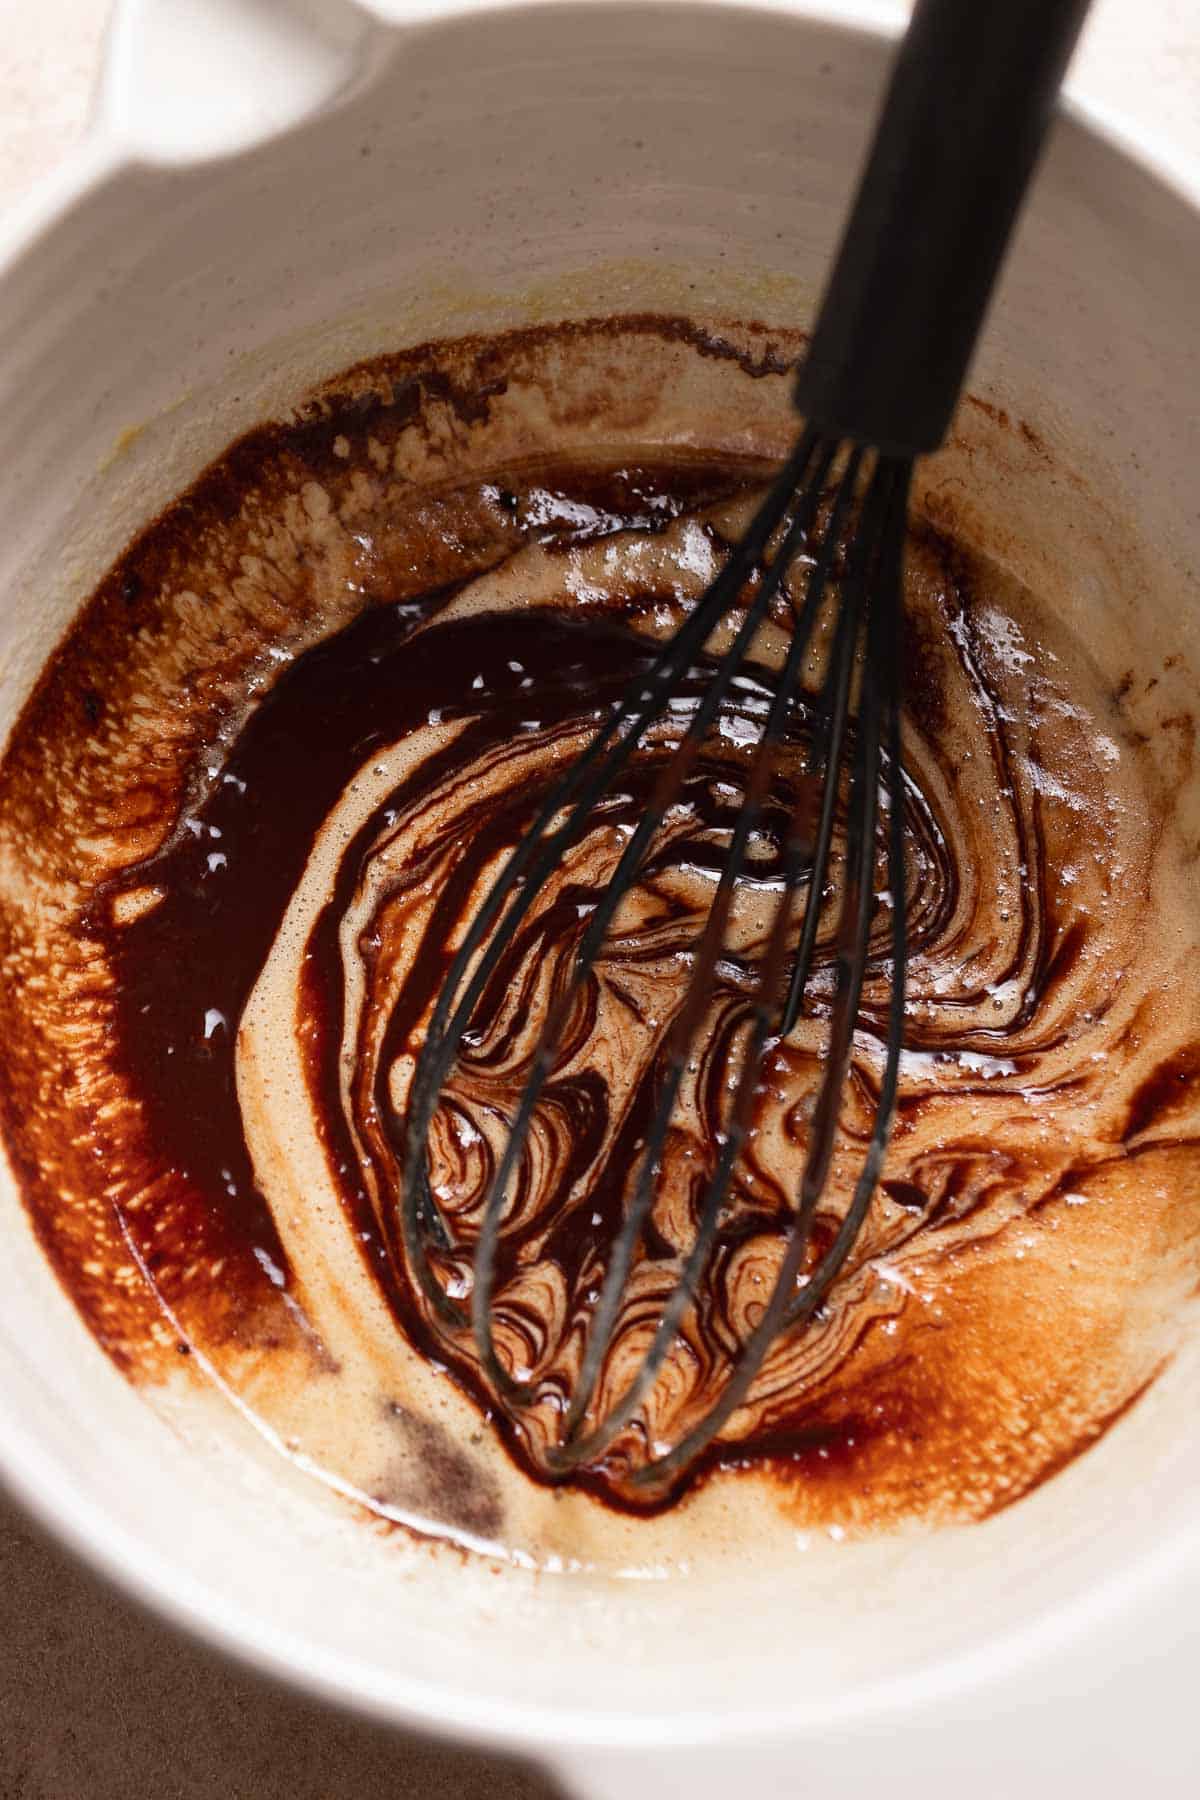 A mixing bowl with the whisked eggs and sugar with melted chocolate streamed in.